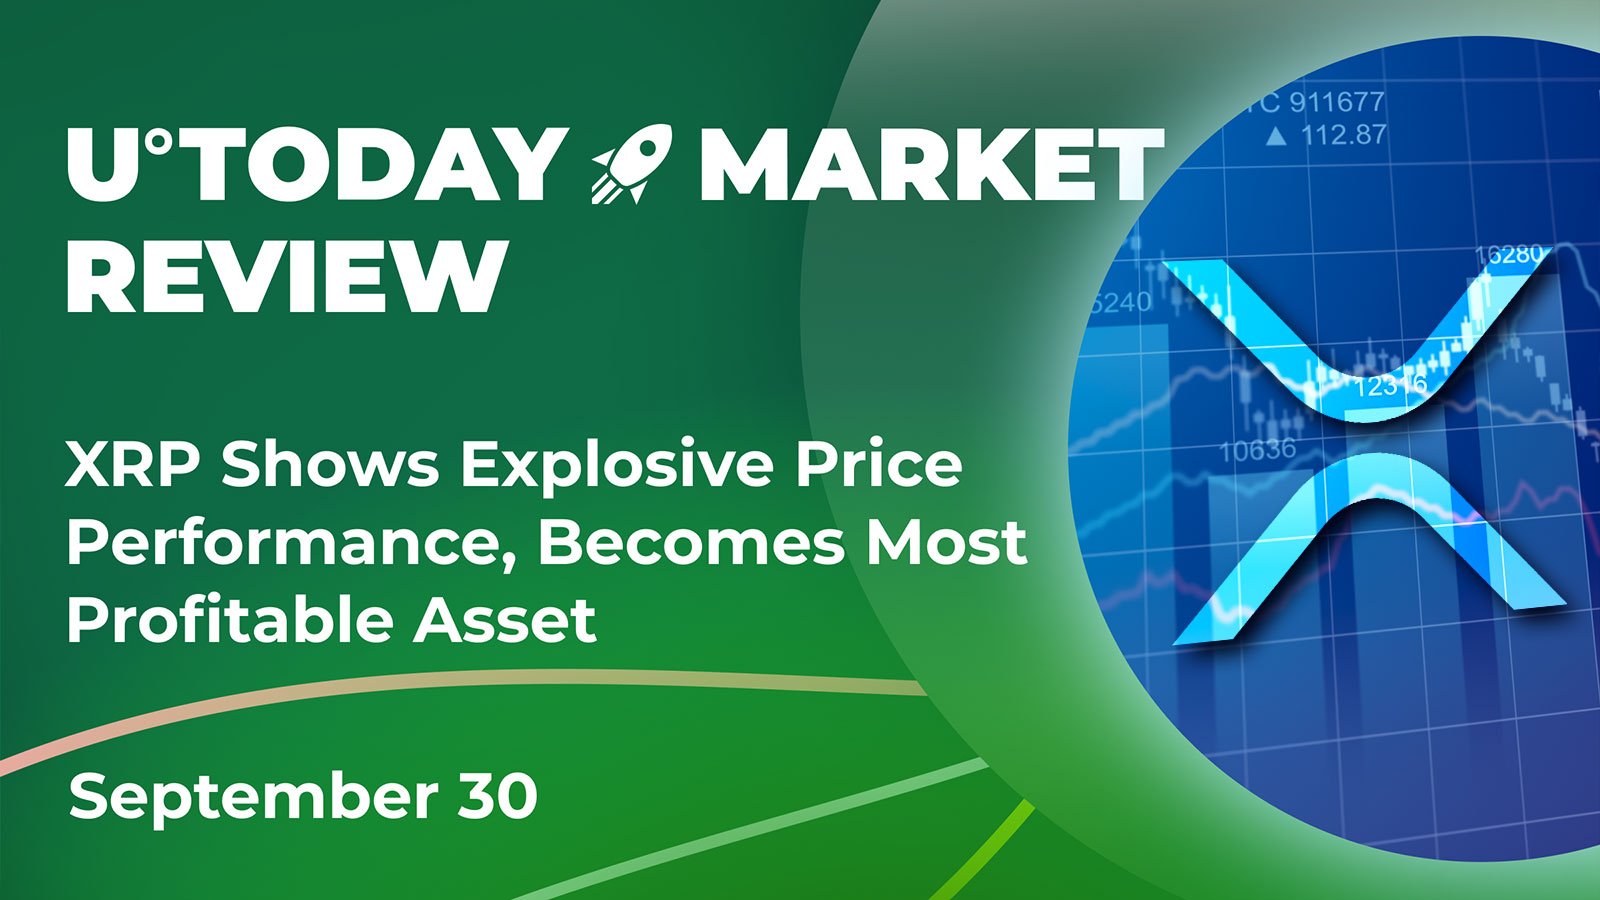 XRP Shows Explosive Price Performance, Becomes Most Profitable Asset: Crypto Market Review, September 30